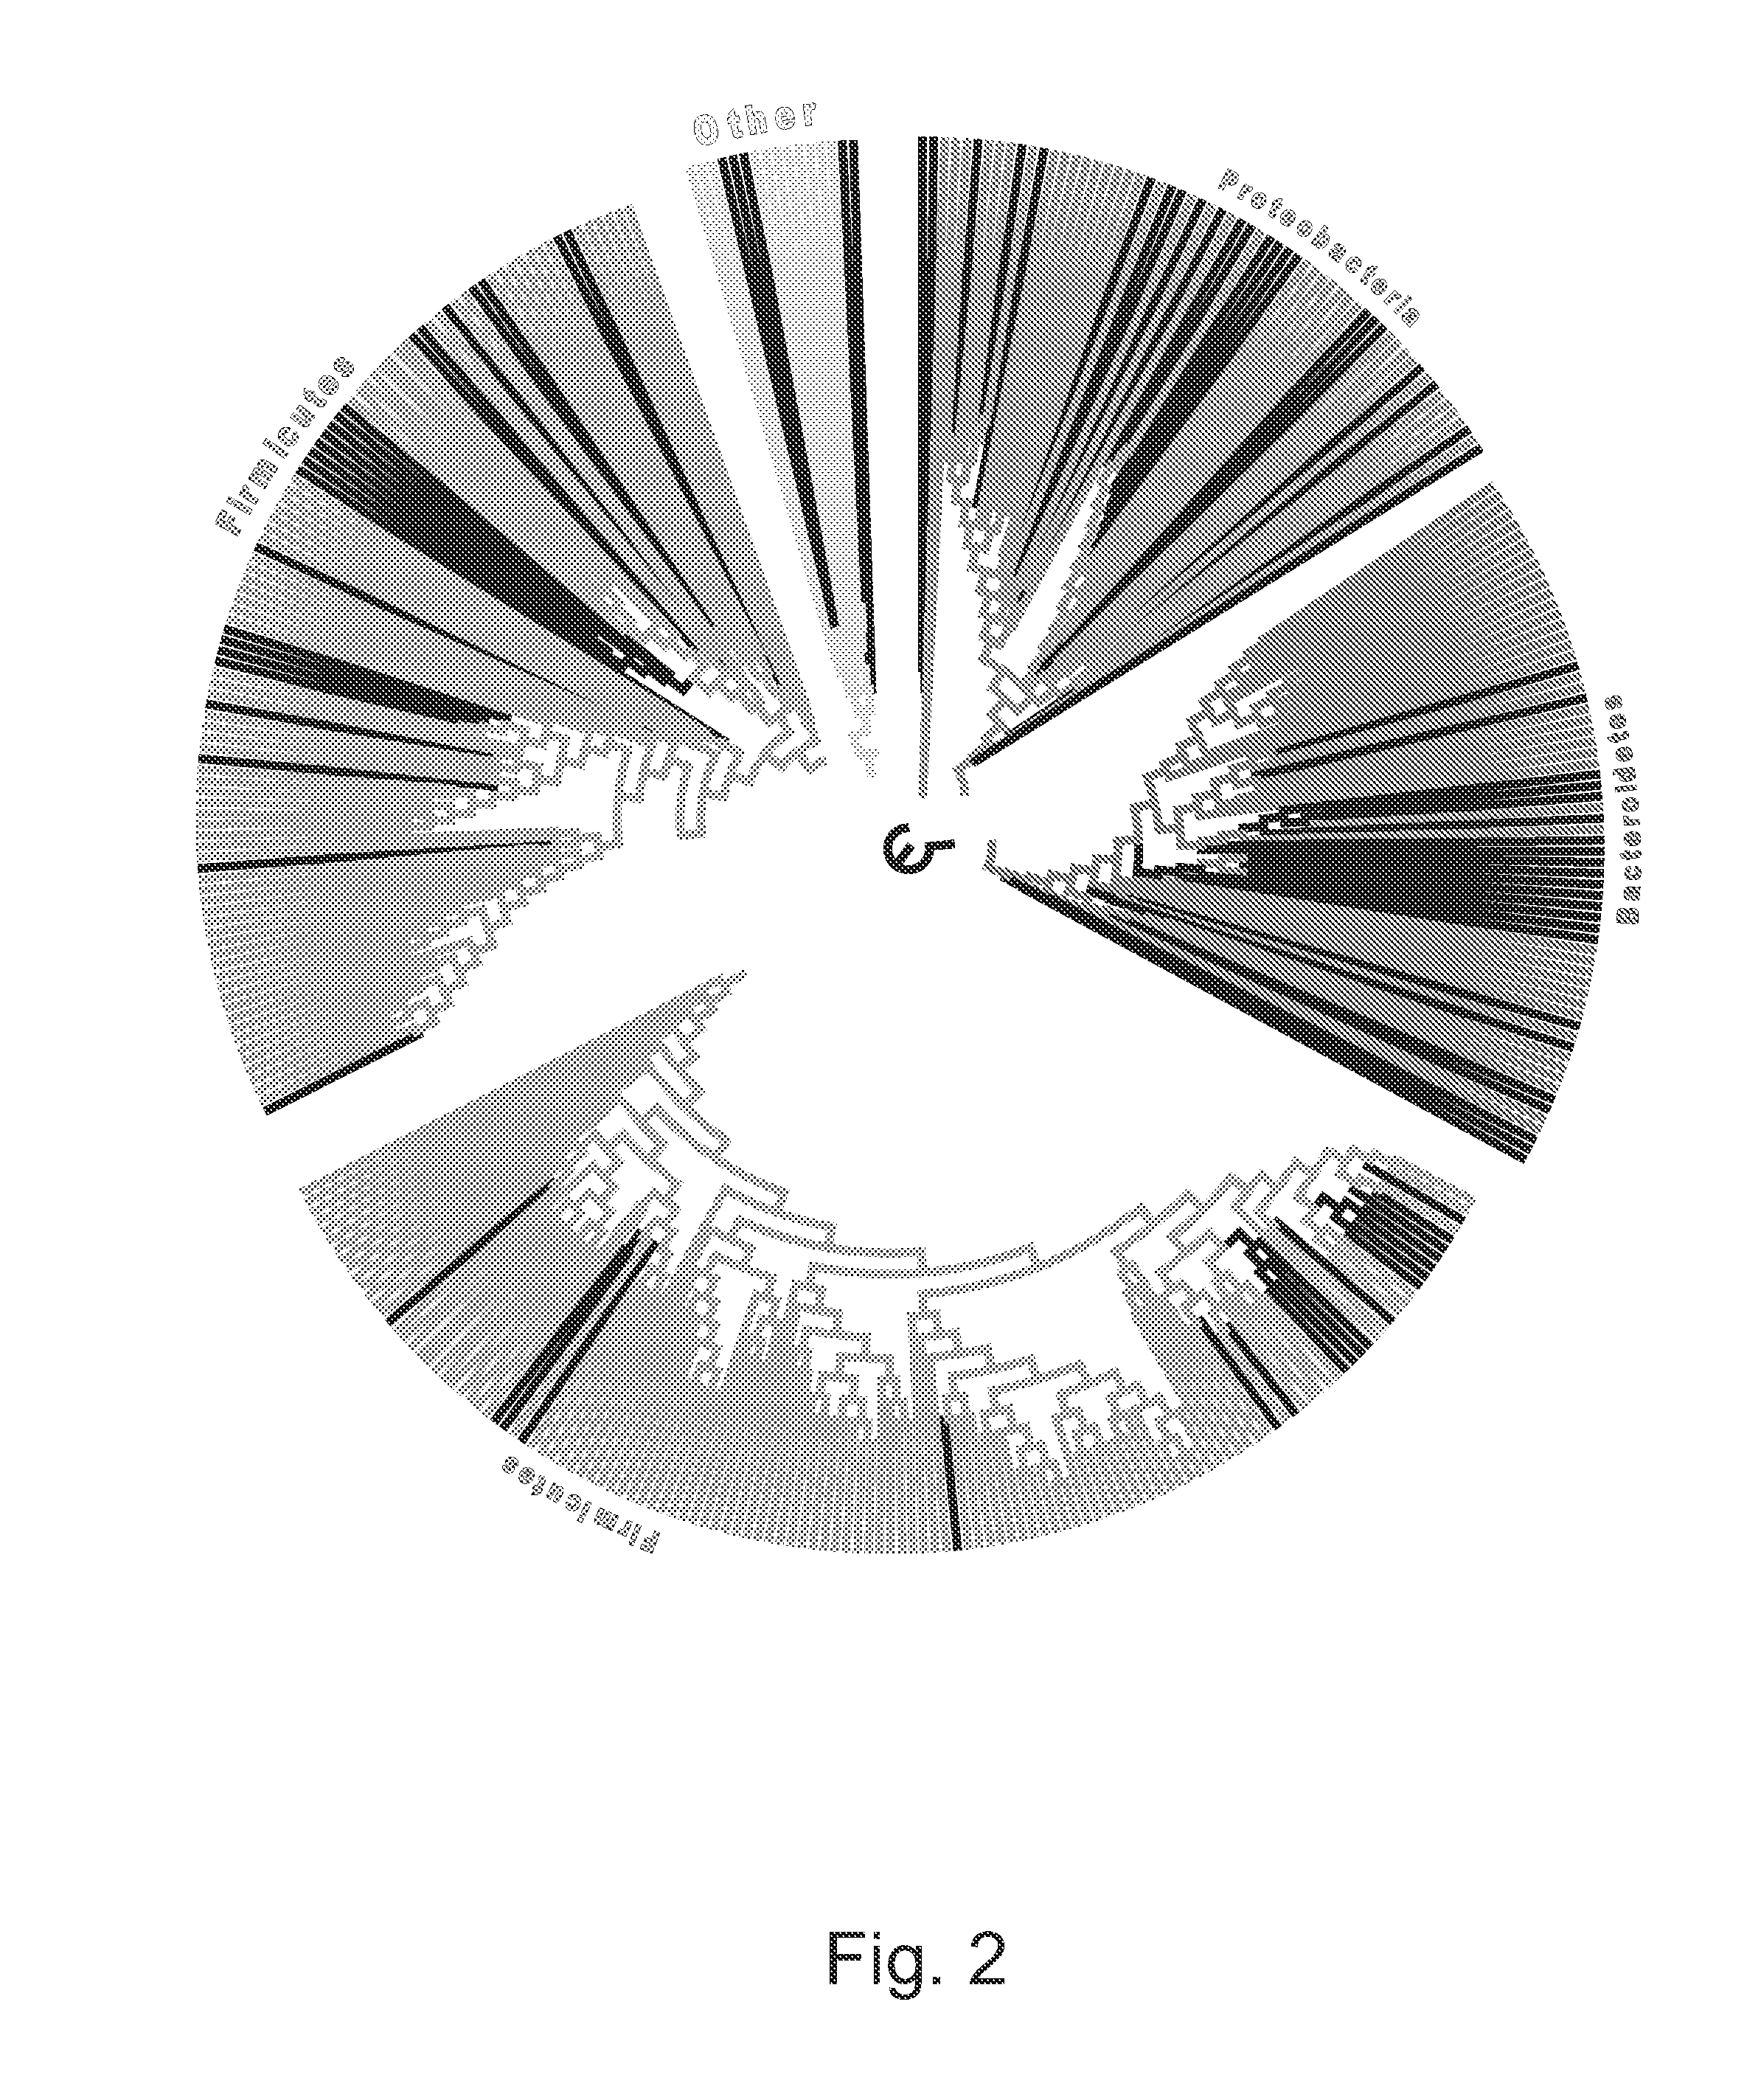 Methods and kits for detecting adenomas, colorectal cancer, and uses thereof